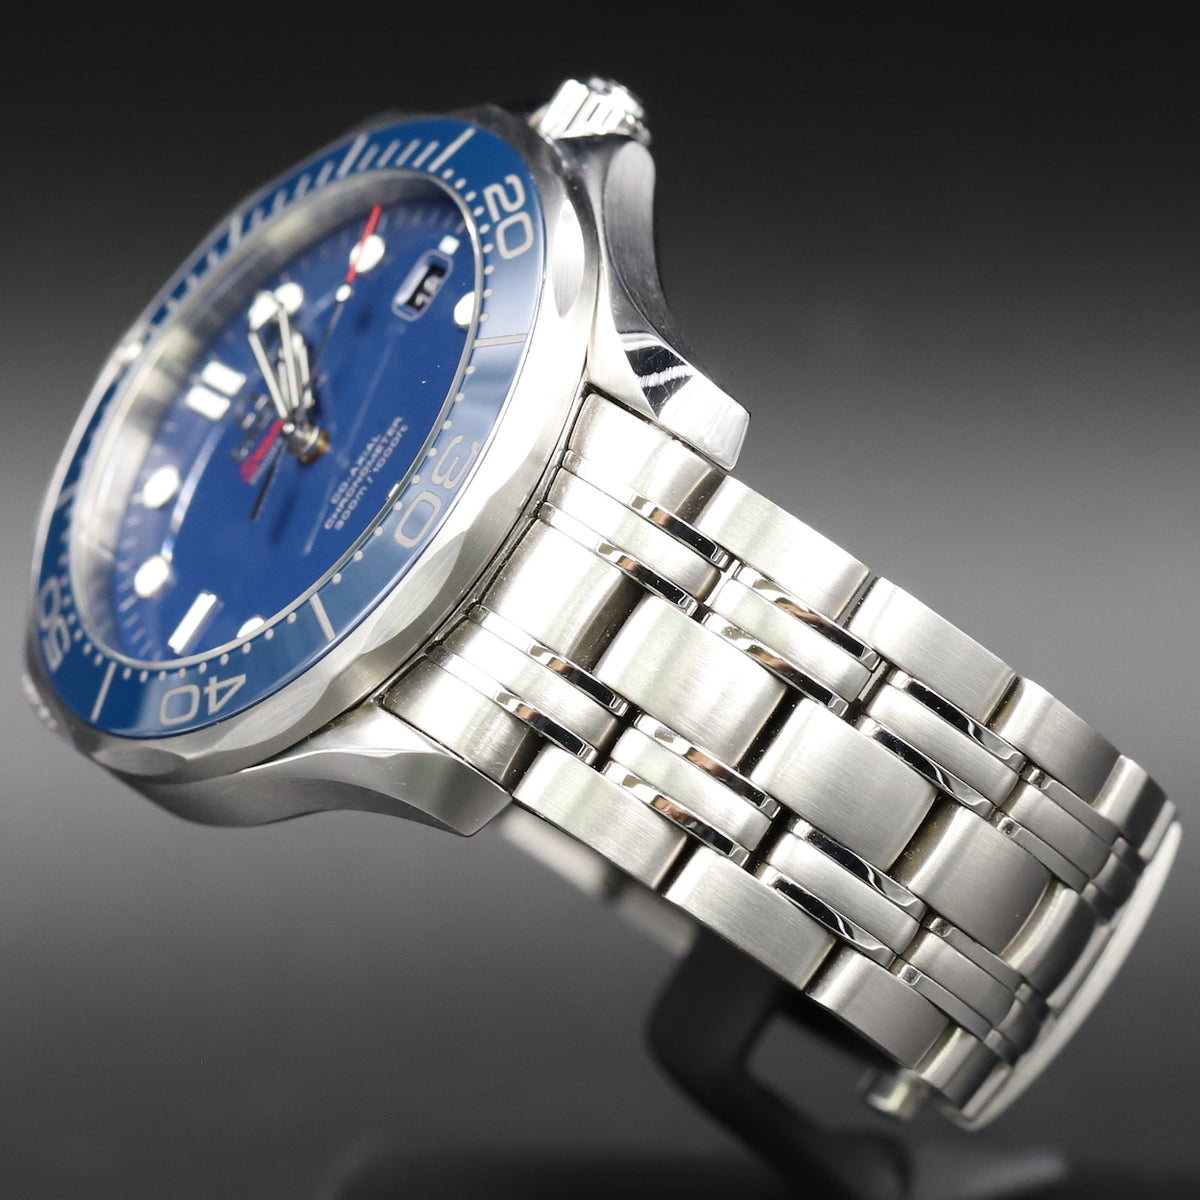 Omega<br>212.30.41.20.03.001 Seamaster Diver 300M Co-Axial Blue Dial